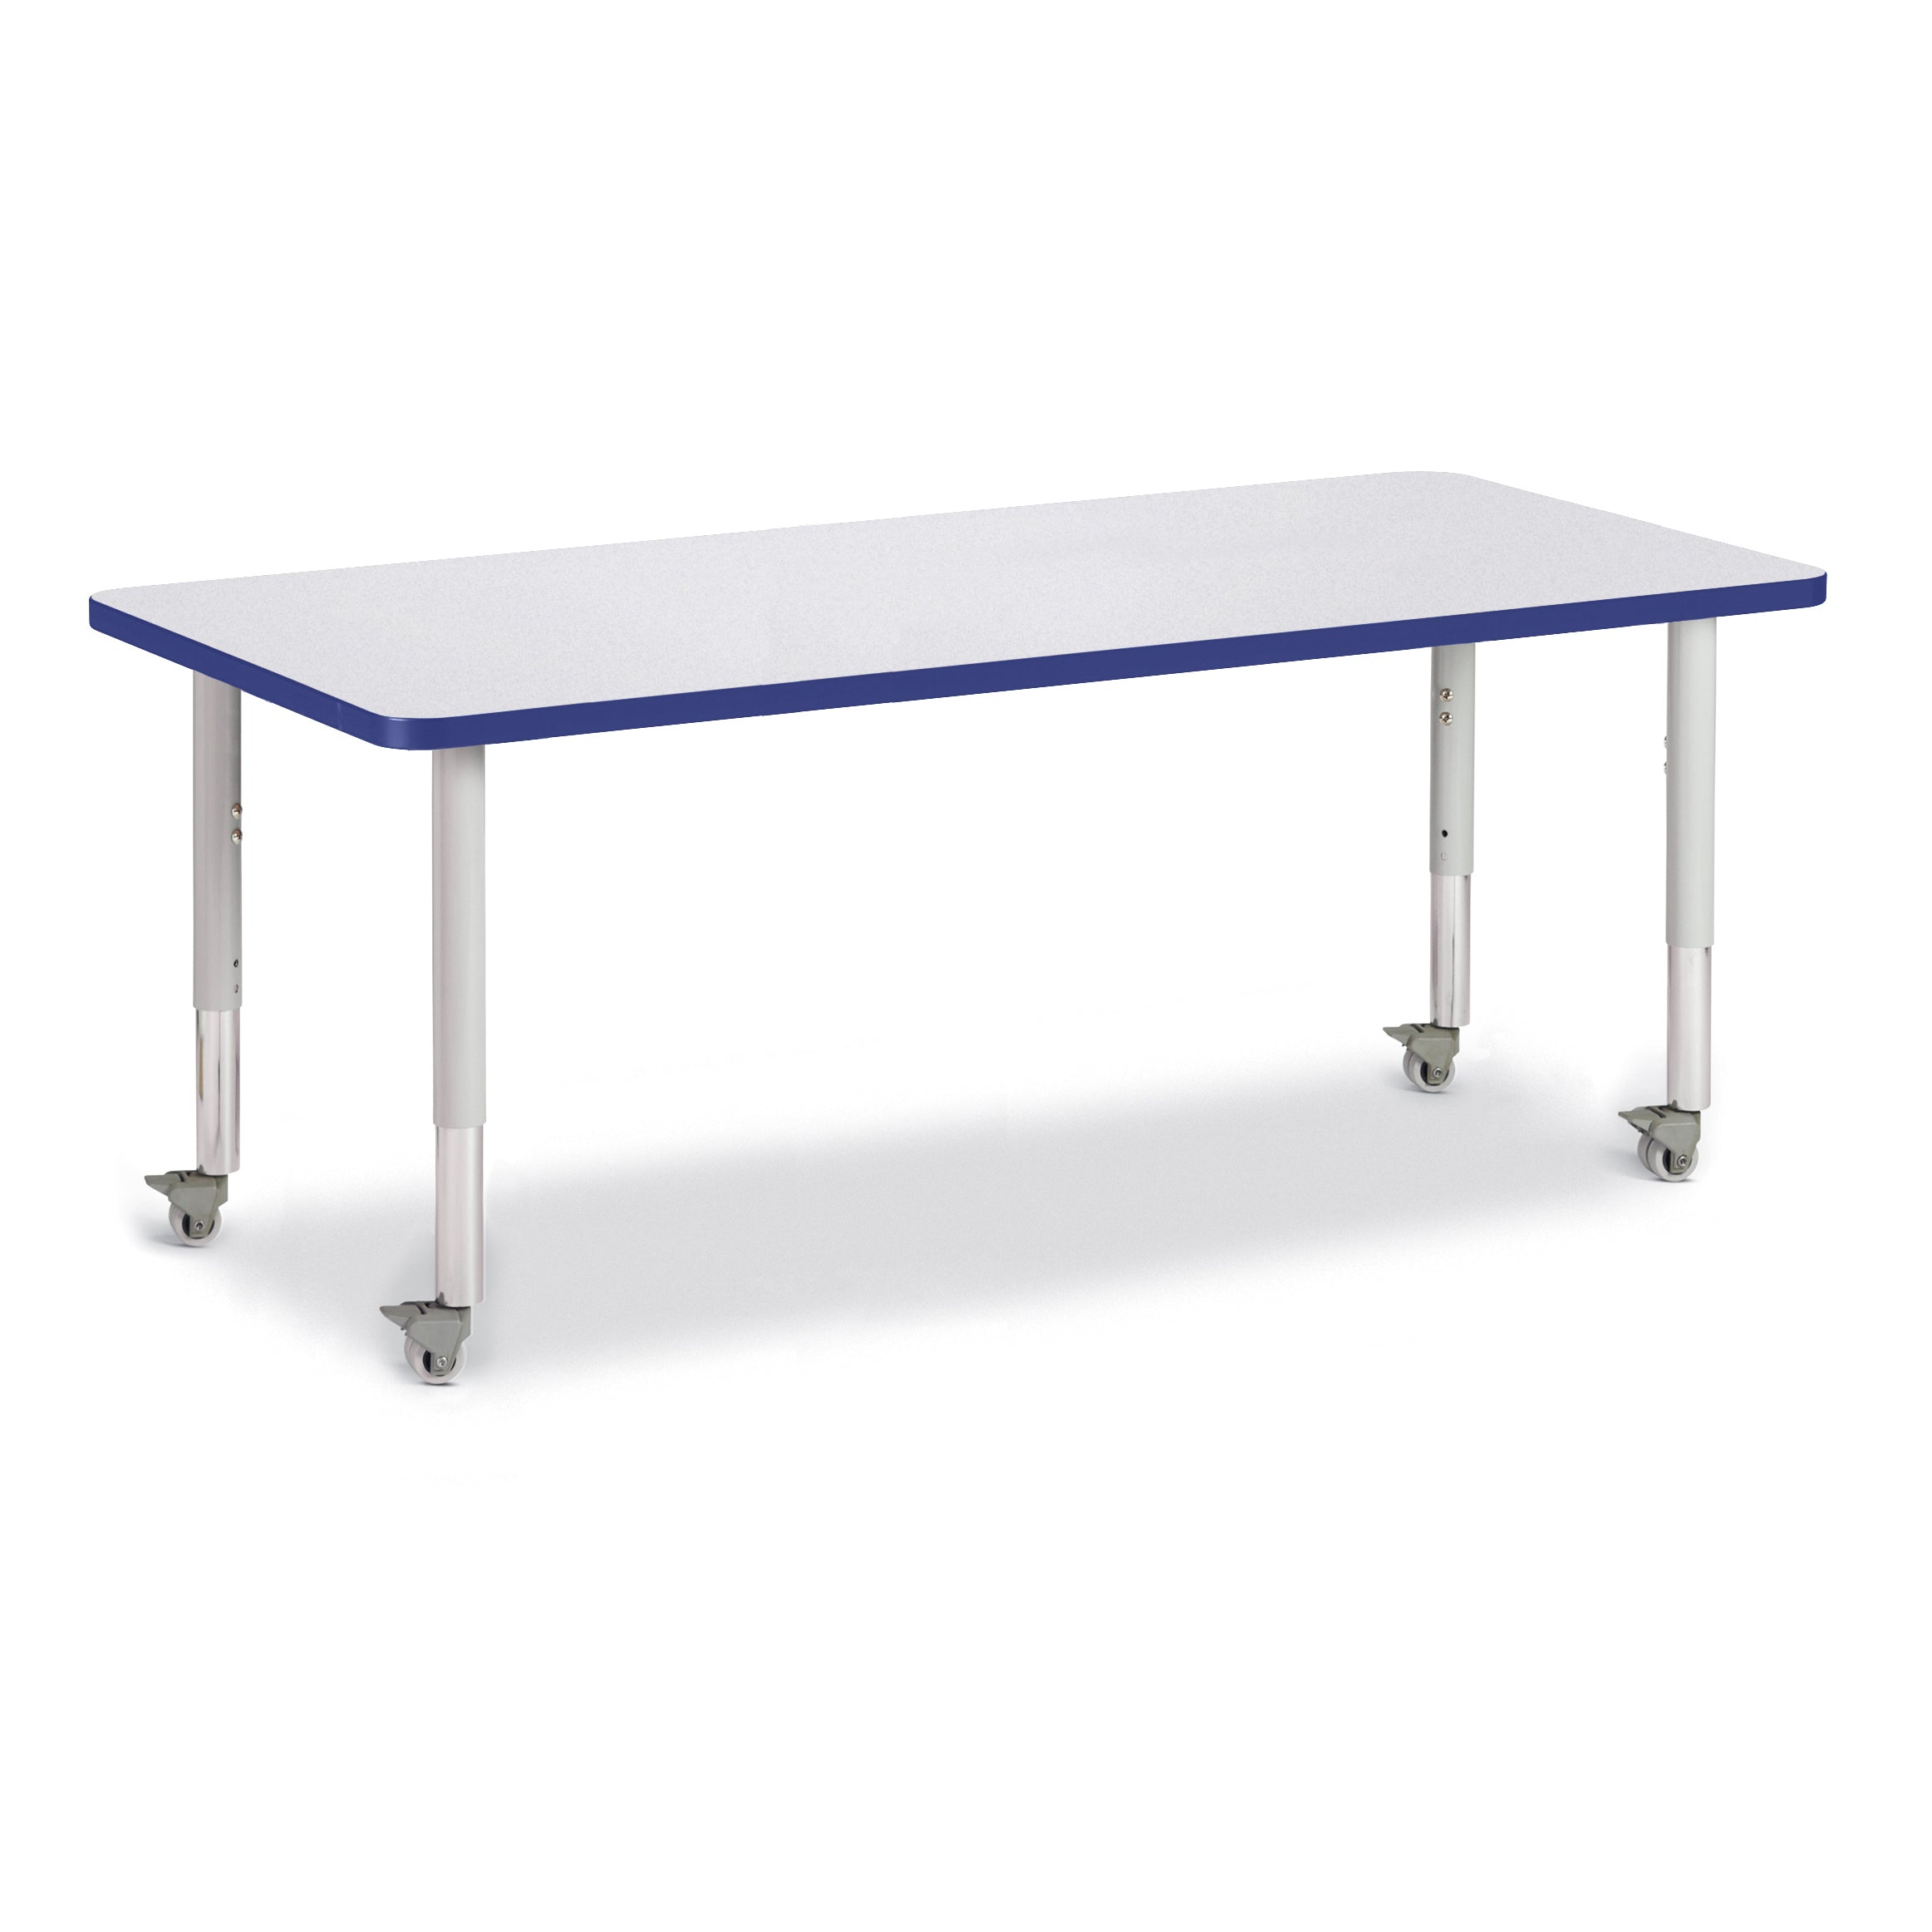 6413JCM003, Berries Rectangle Activity Table - 30" X 72", Mobile - Freckled Gray/Blue/Gray